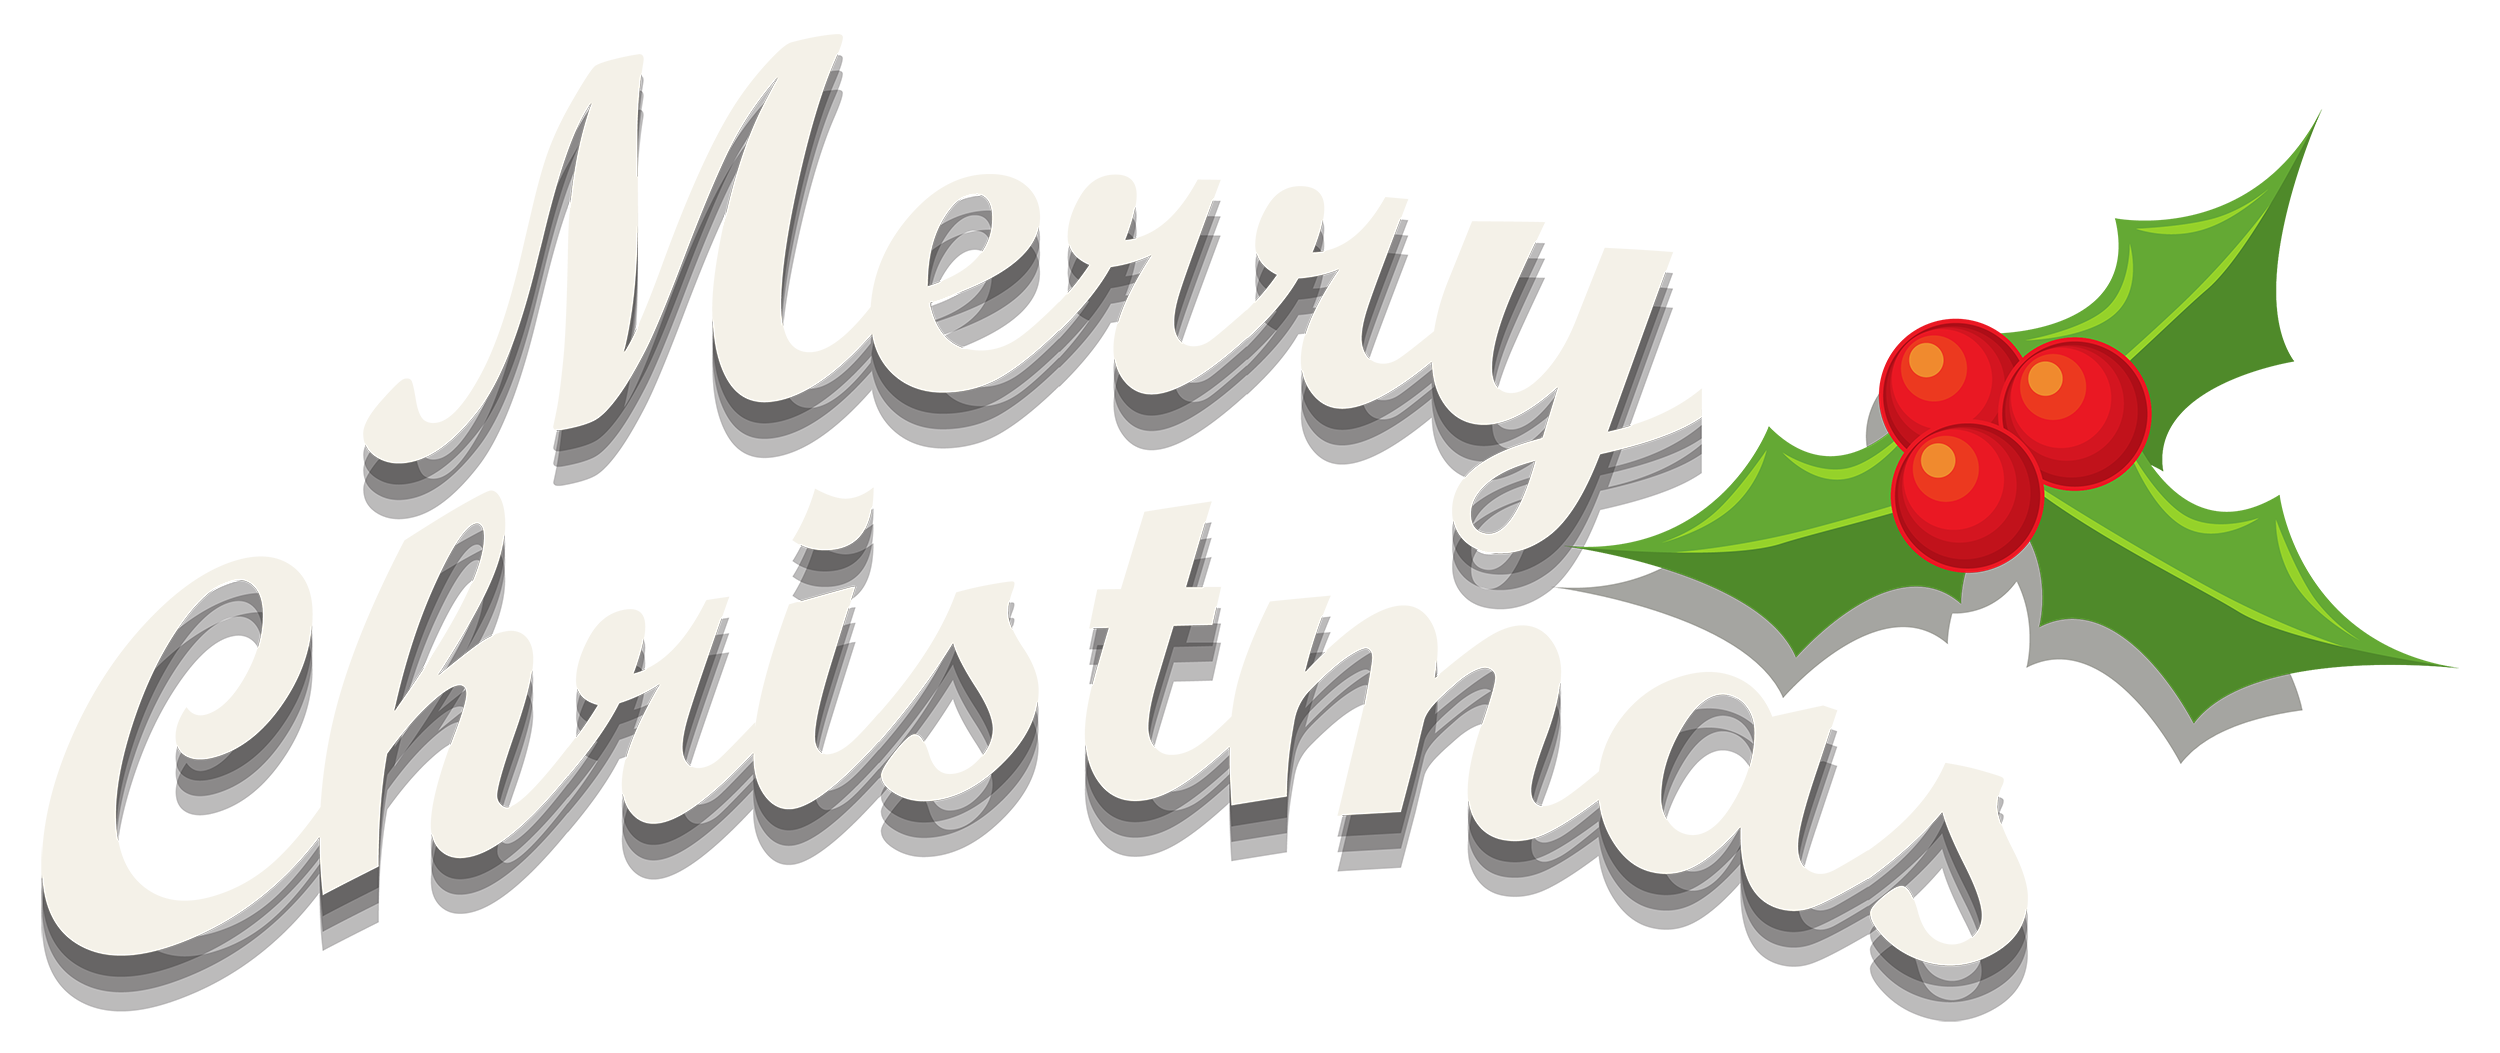 Happy Christmas Text PNG Transparent Image